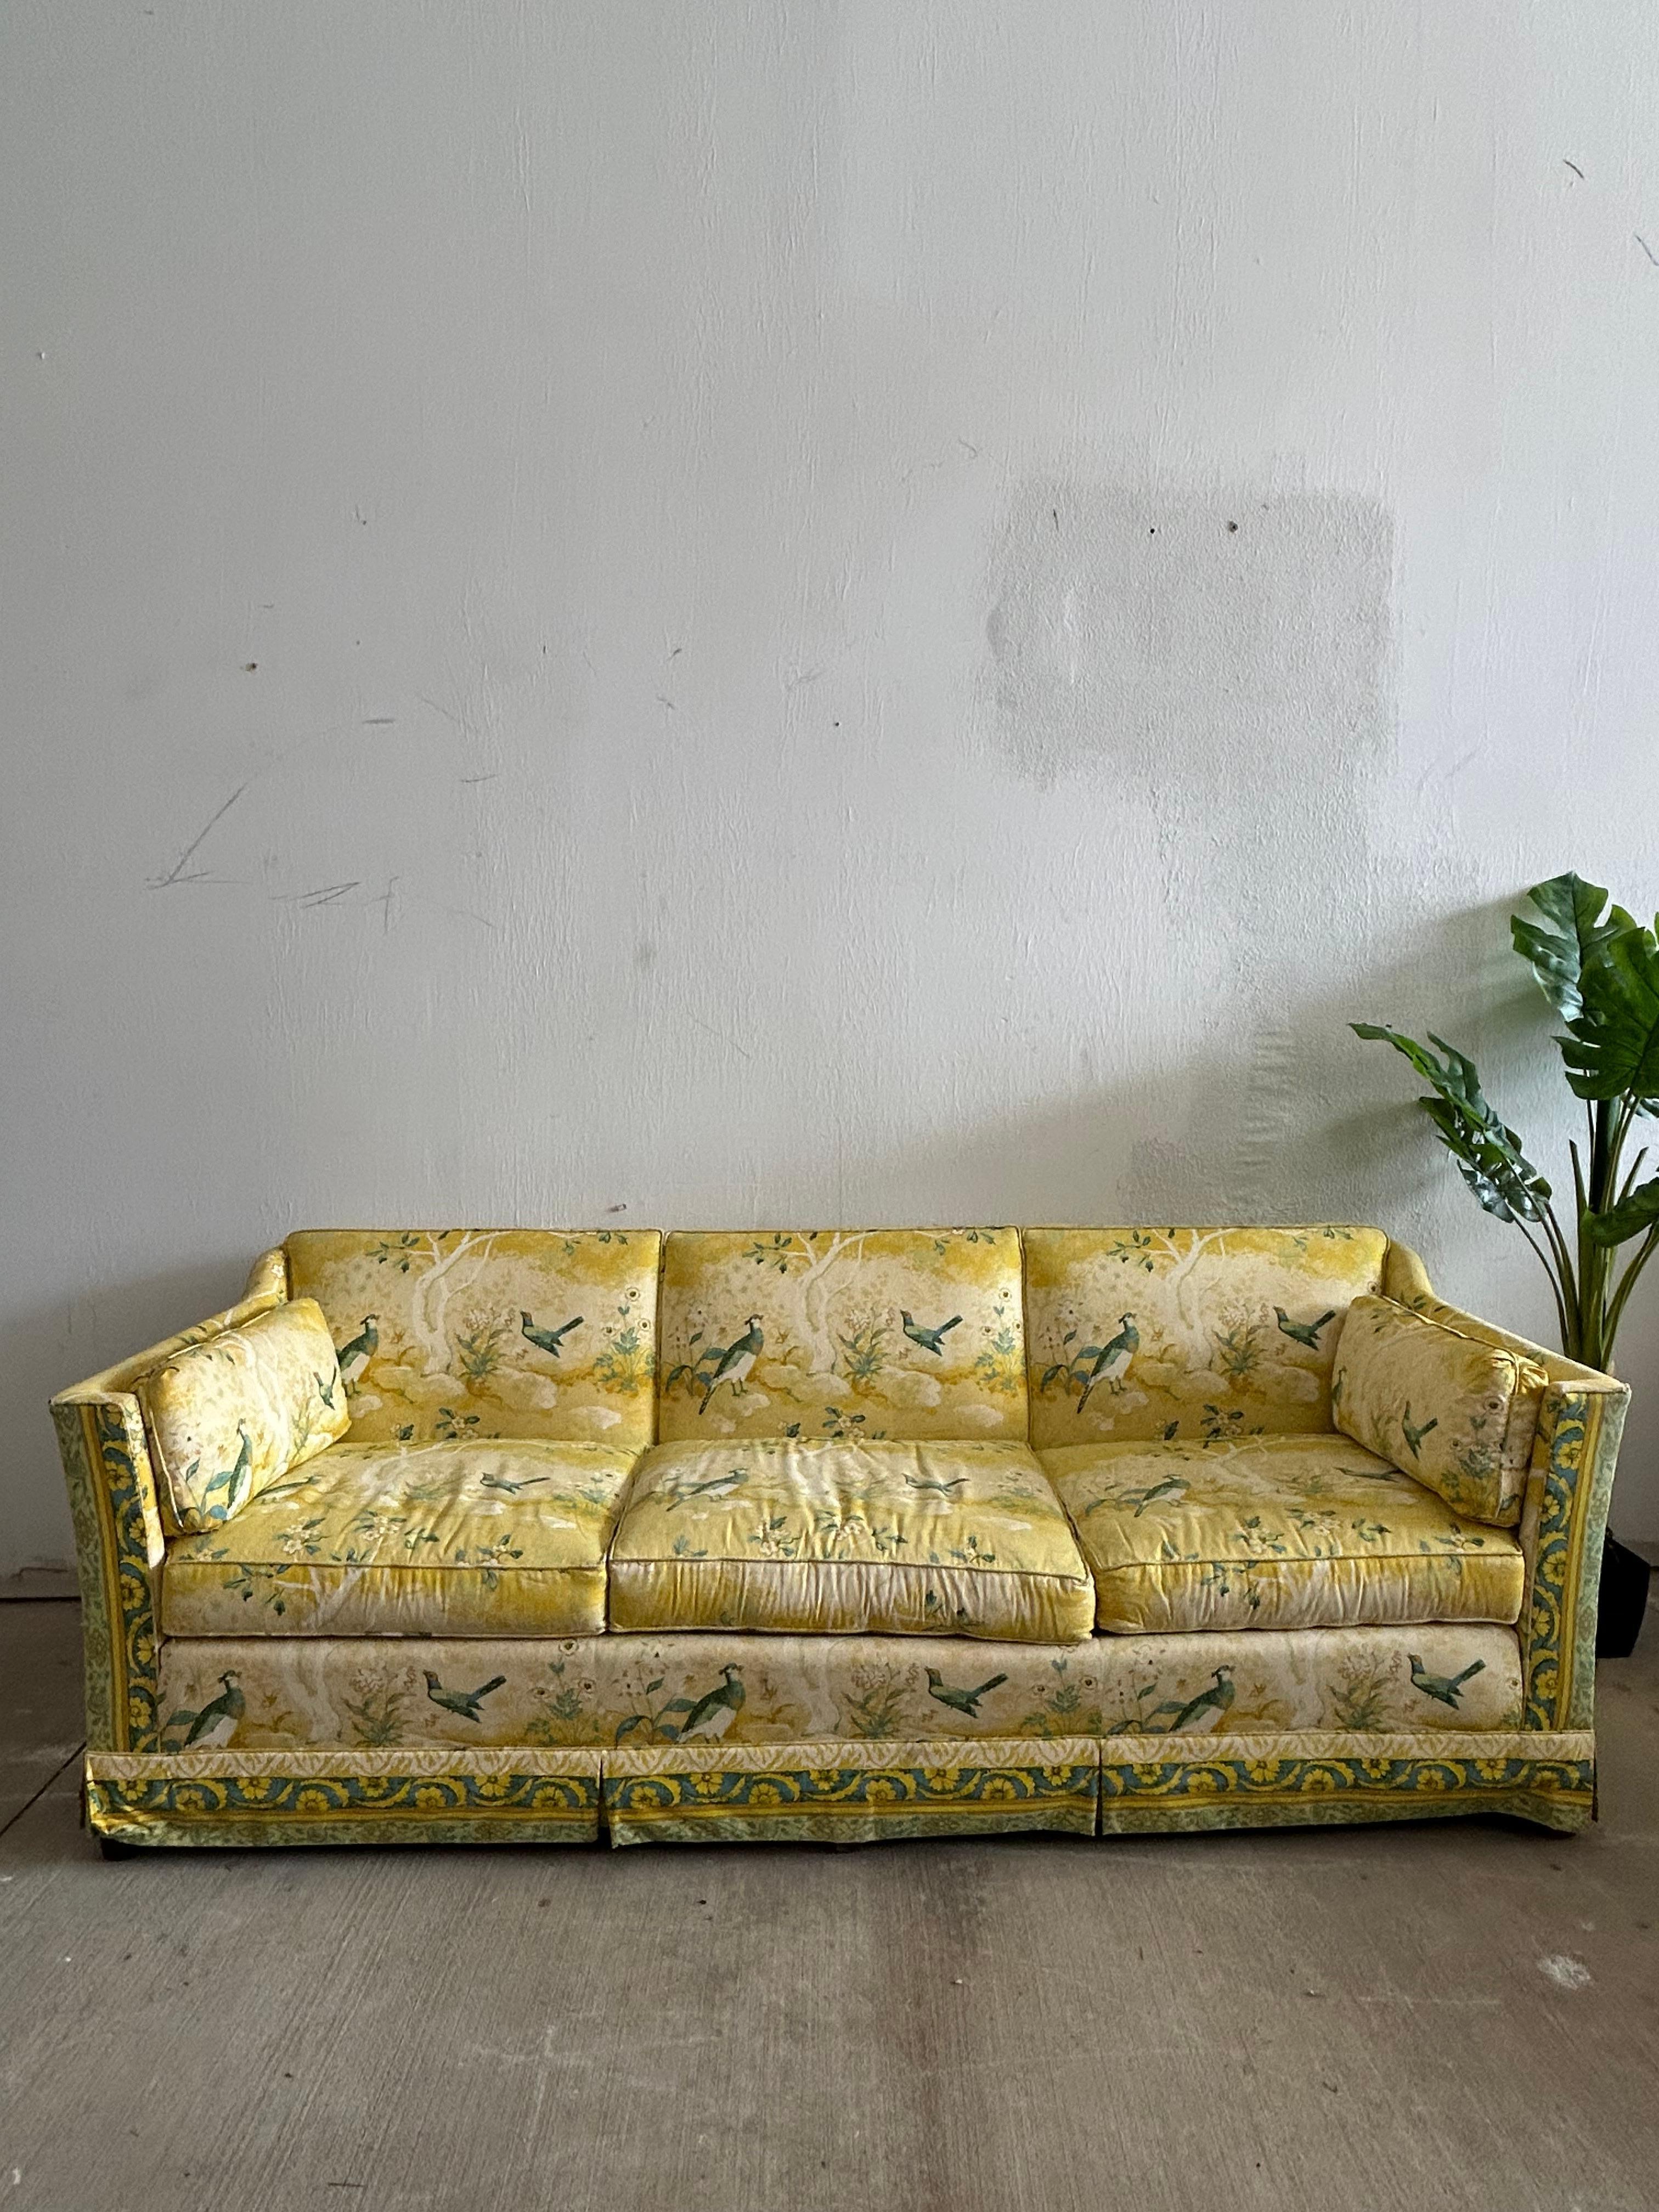 Vintage mid-century modern yellow floral/bird sofa. This 3-seater sofa is very unique. This was once reupholstered but does need some TLC again. It has some good bones, see pictures for mcm legs, no structural damages. Message us for any more